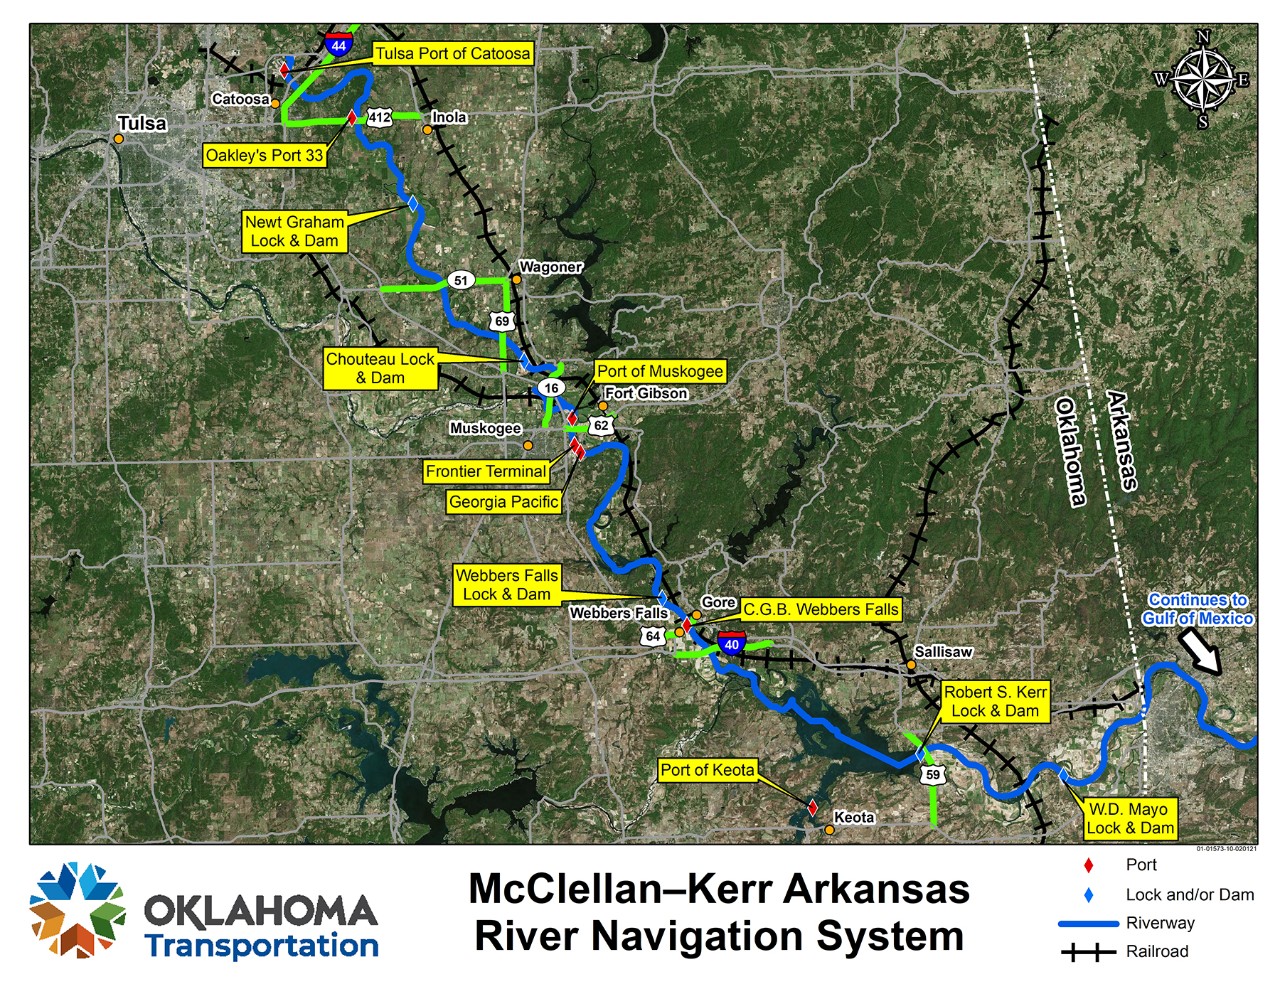 This map shows the Oklahoma port and terminal locations along the McKlellan-Kerr Arkansas River Navigation System.